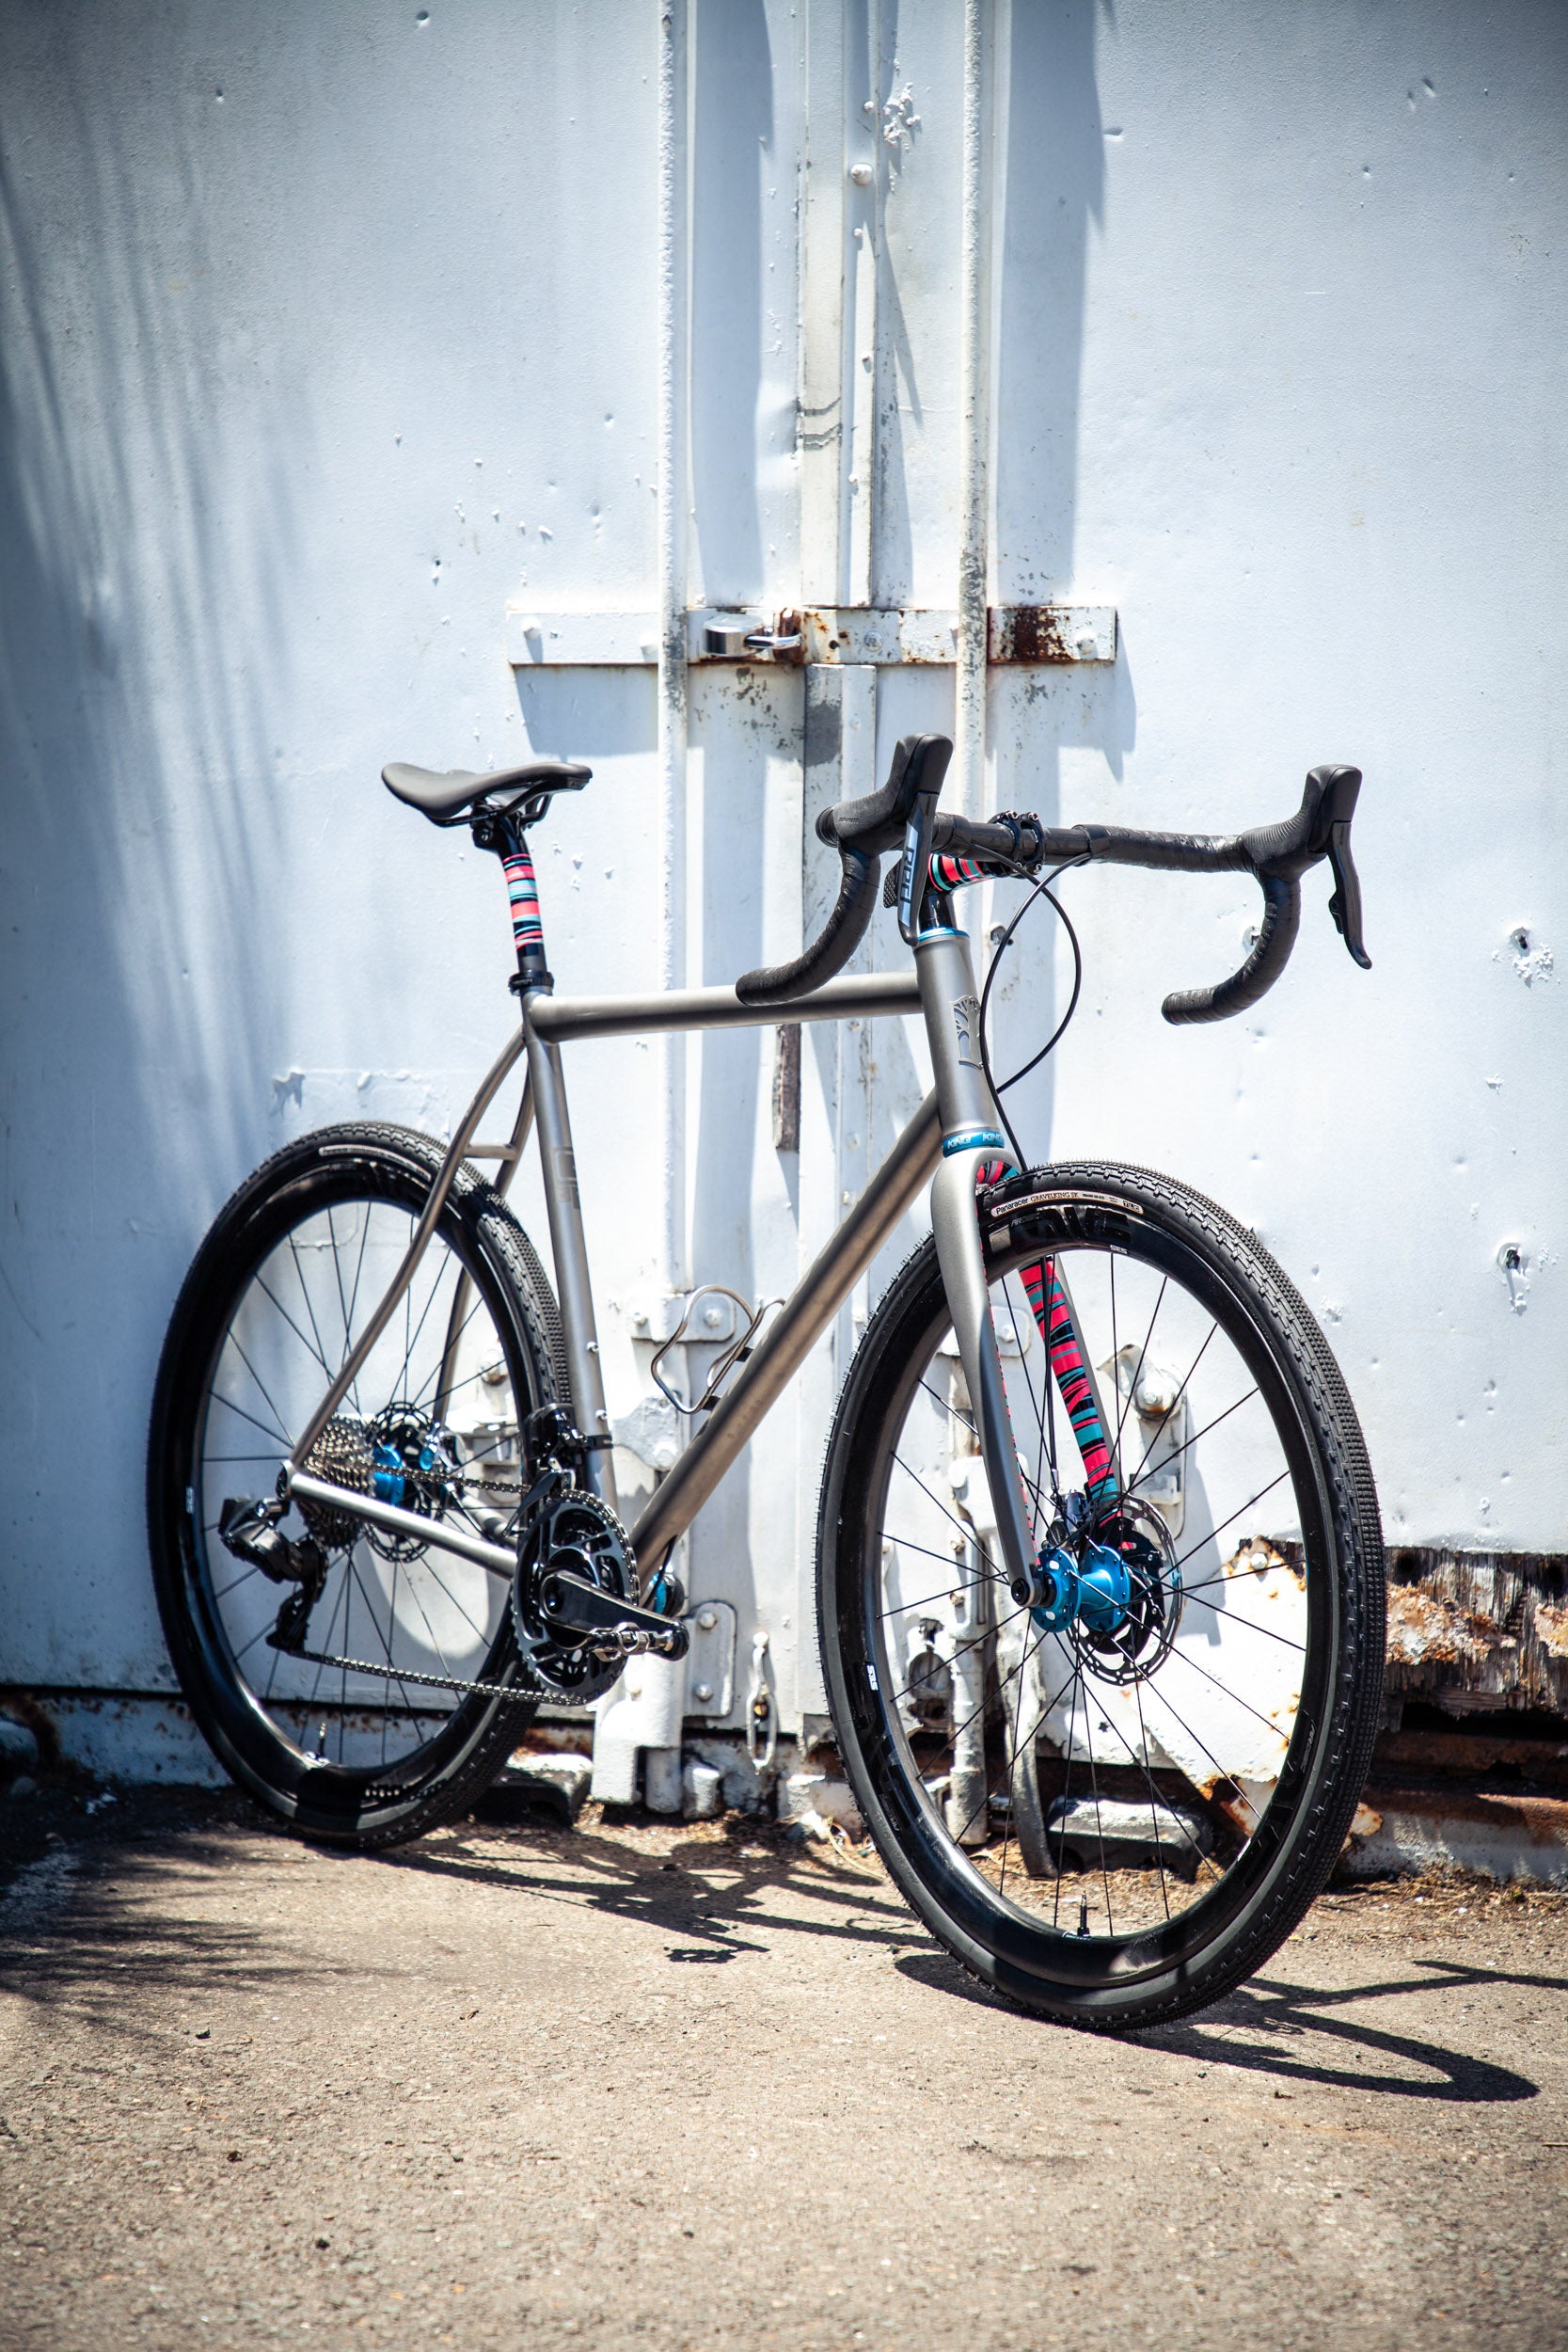 Gallery: A Striped Ti Mosaic All-Road